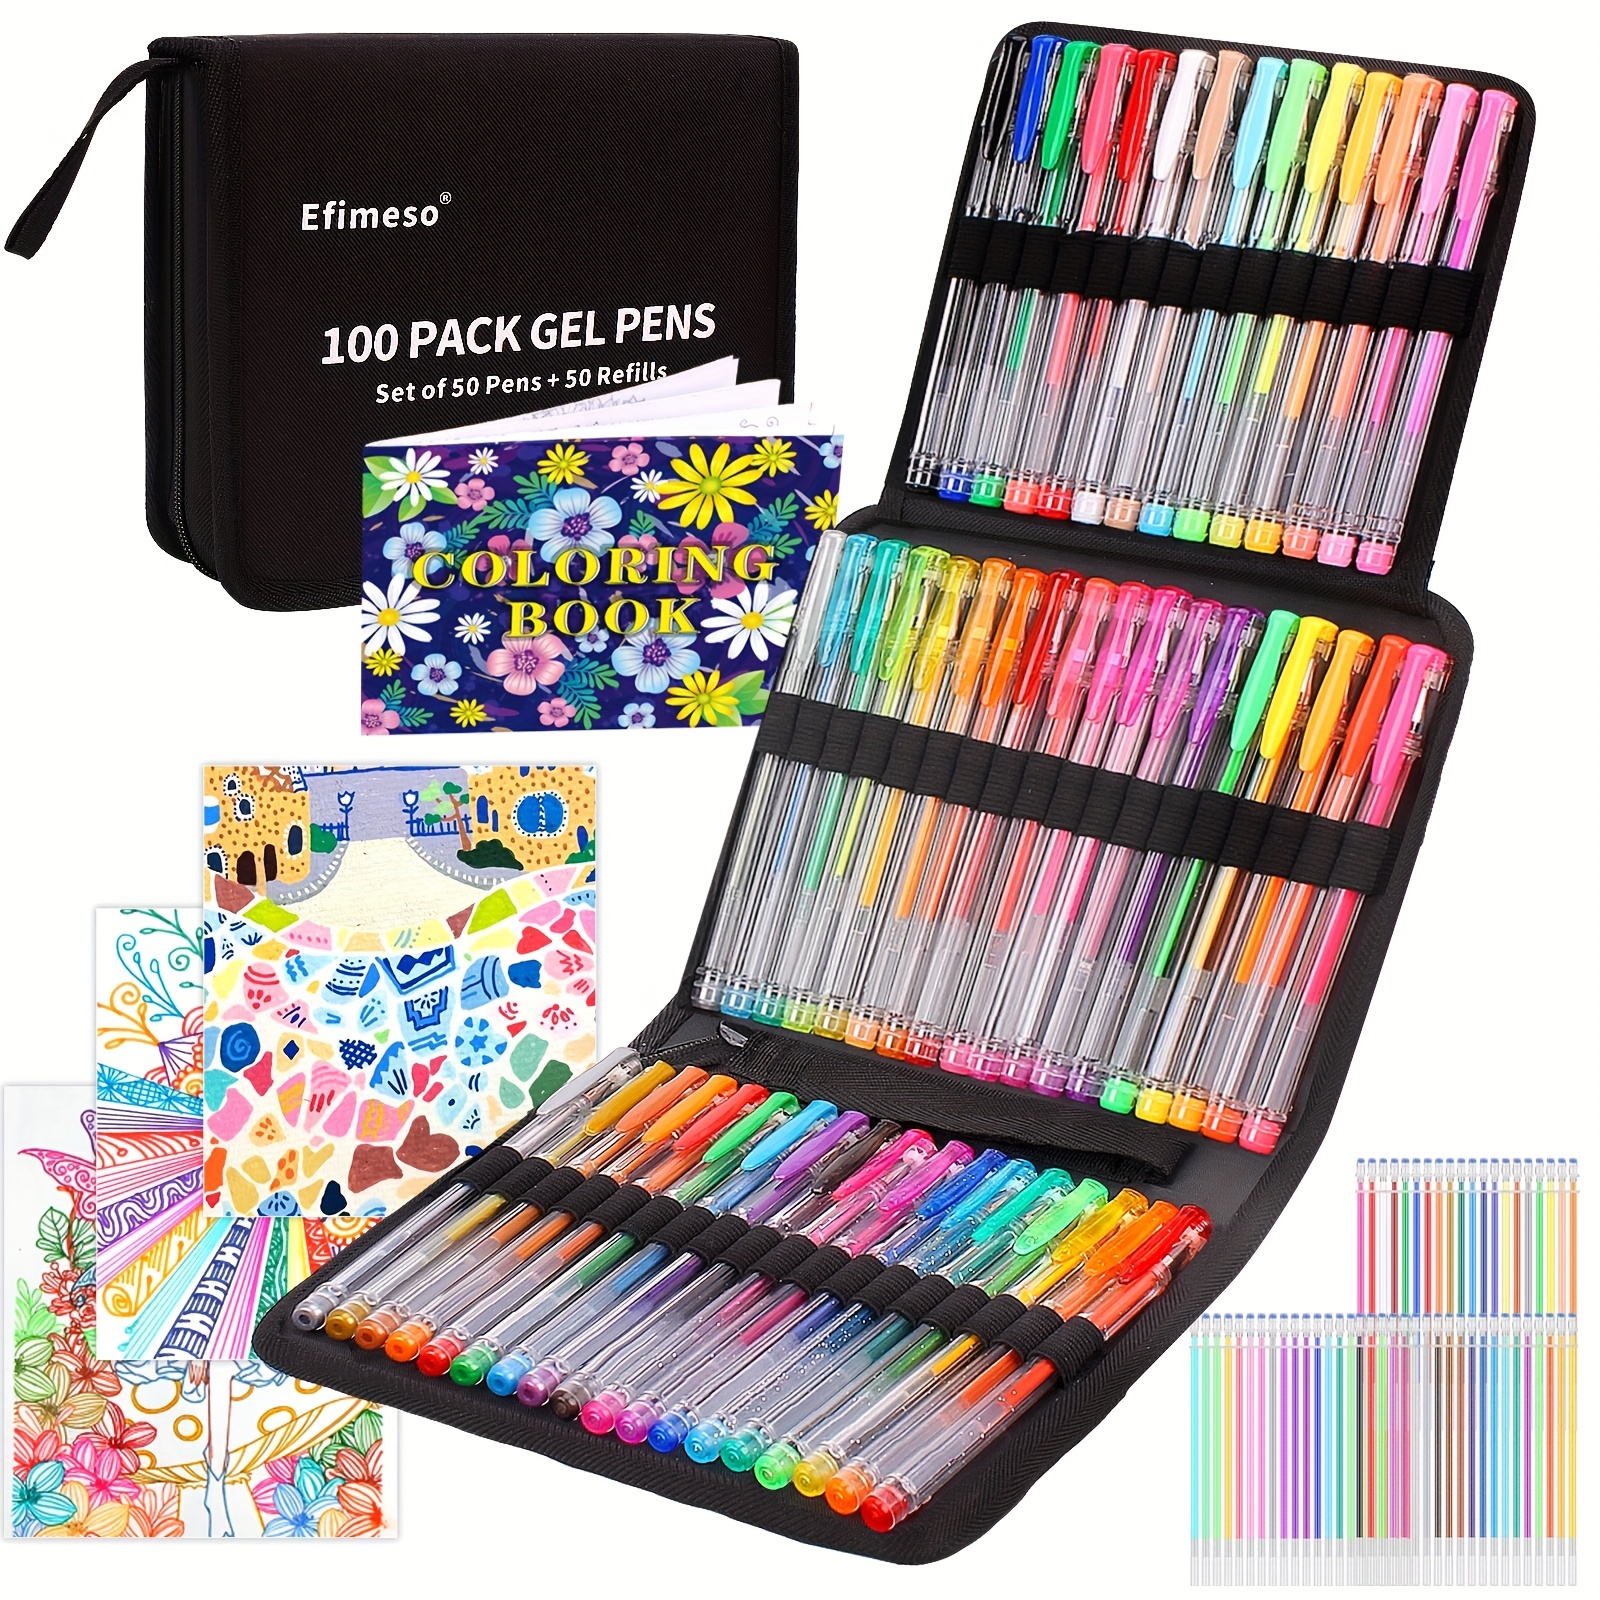 Gel Pens & a Coloring Books, 60/120 Artist Colored Gel Pen with 40% More  Ink,Black Case.Perfect for Kids Drawing Doodlling Kit